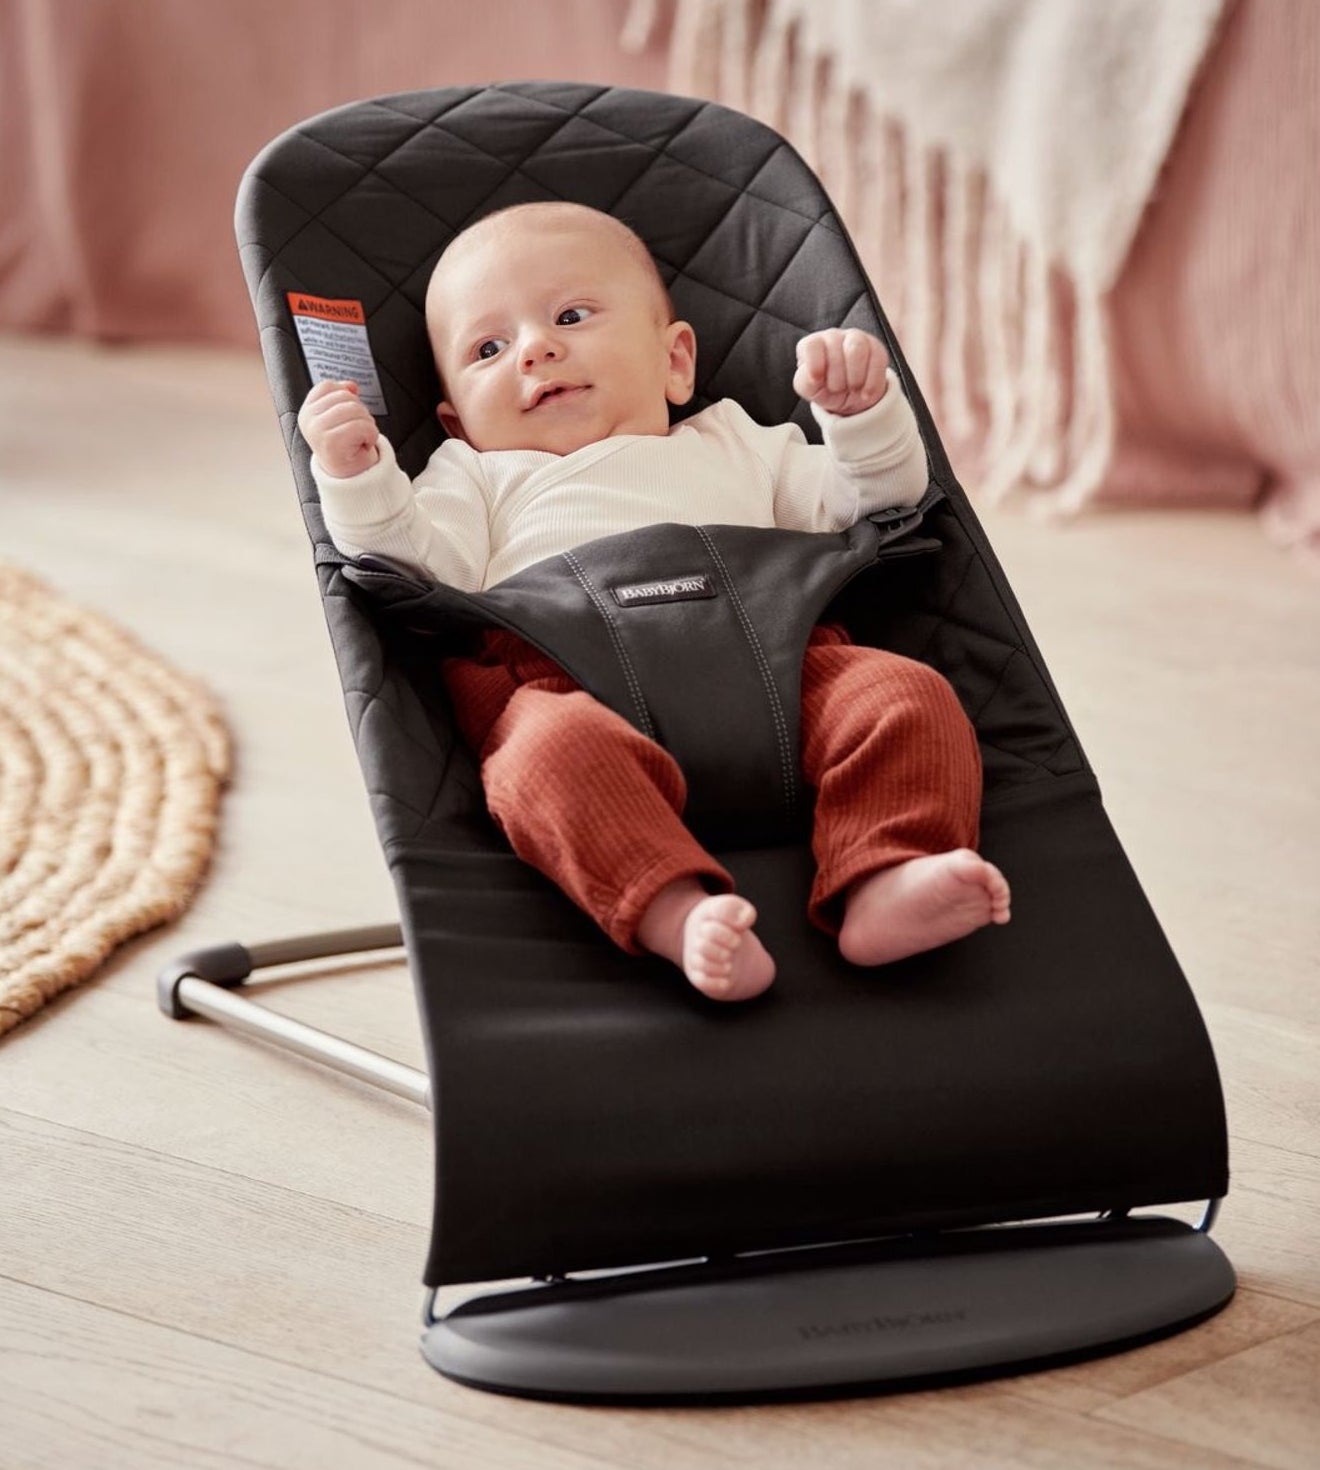 baby sits in bouncer